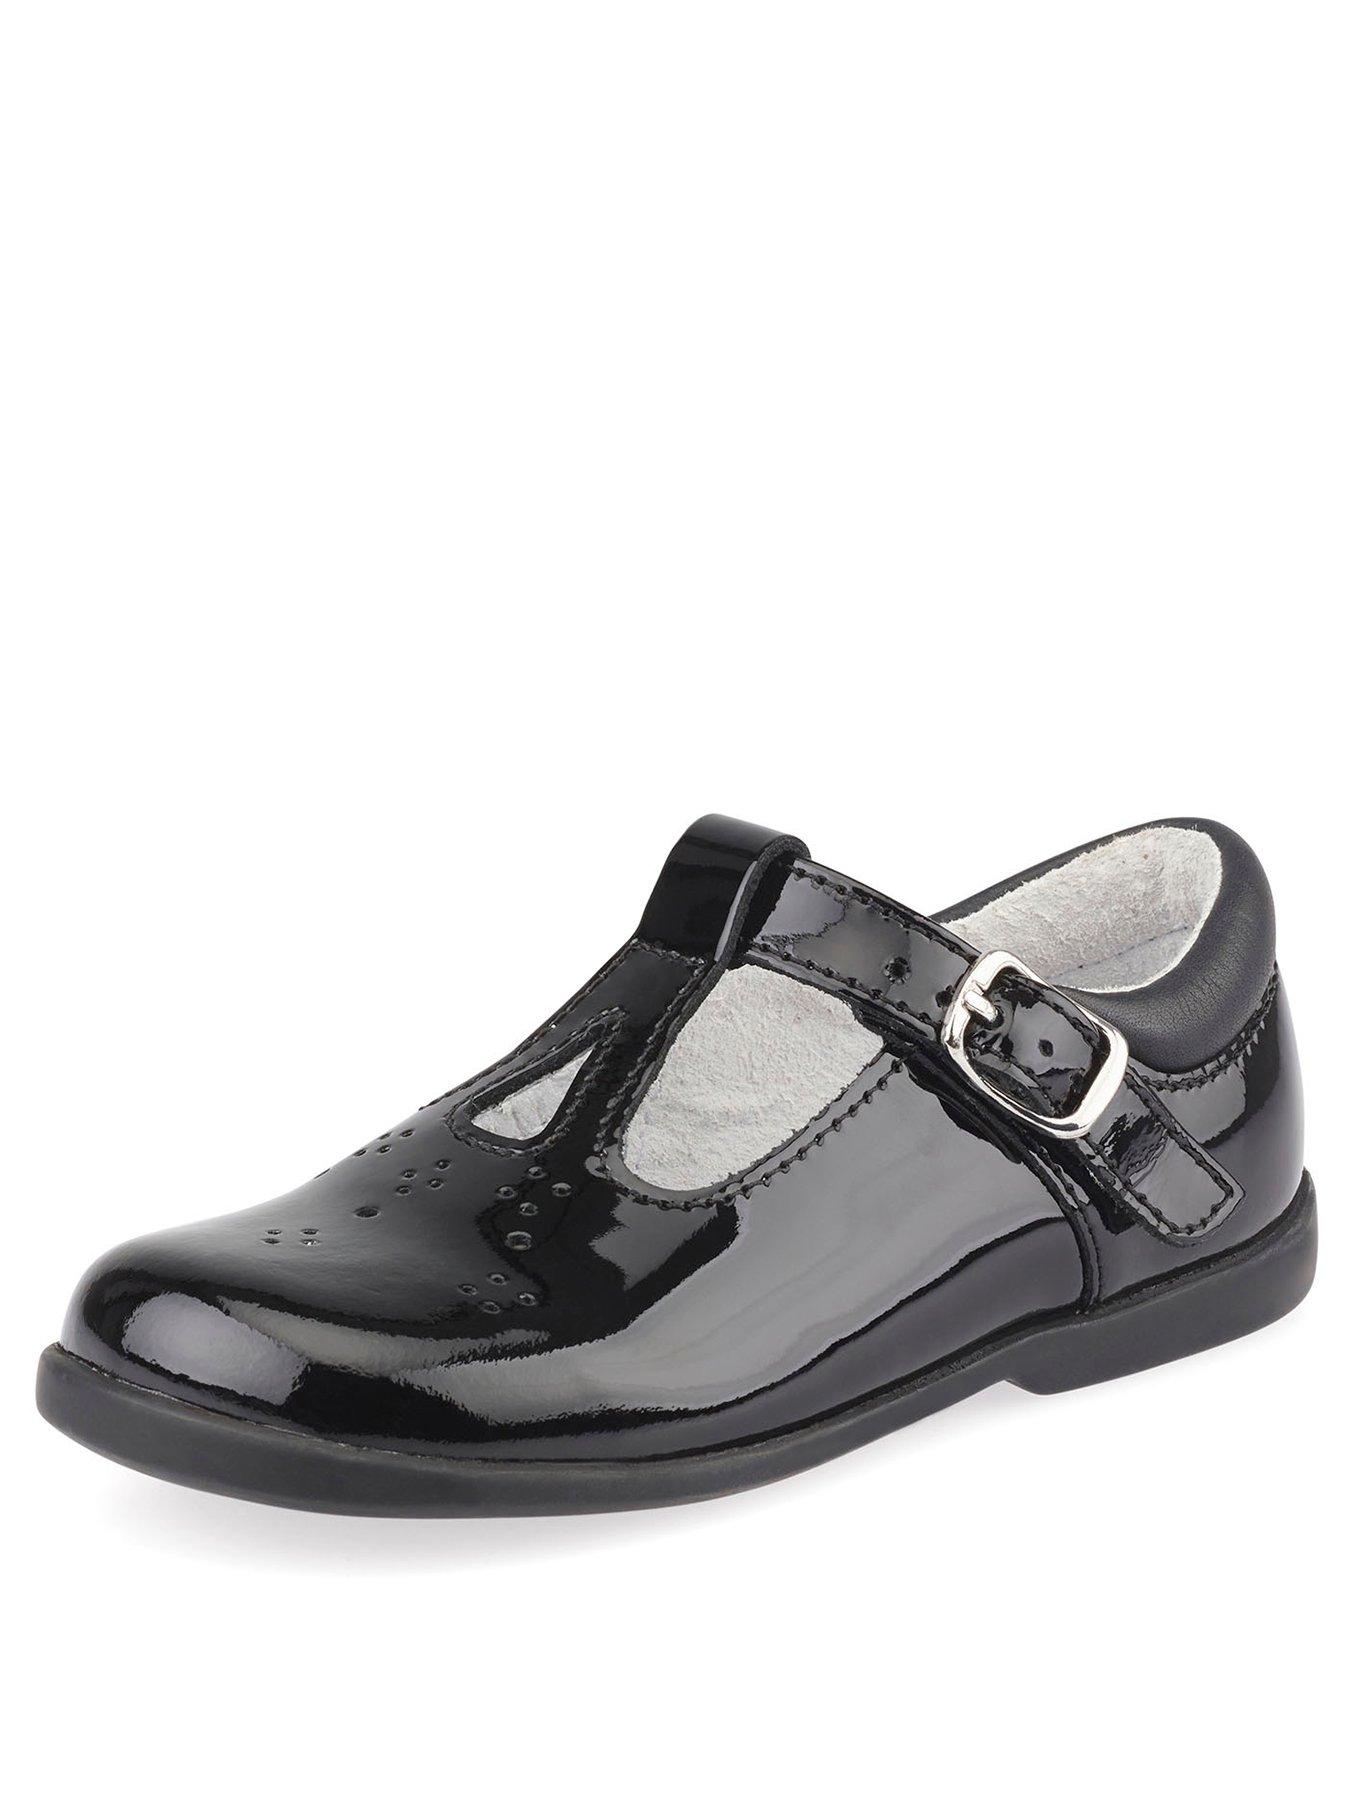 mary jane t bar school shoes